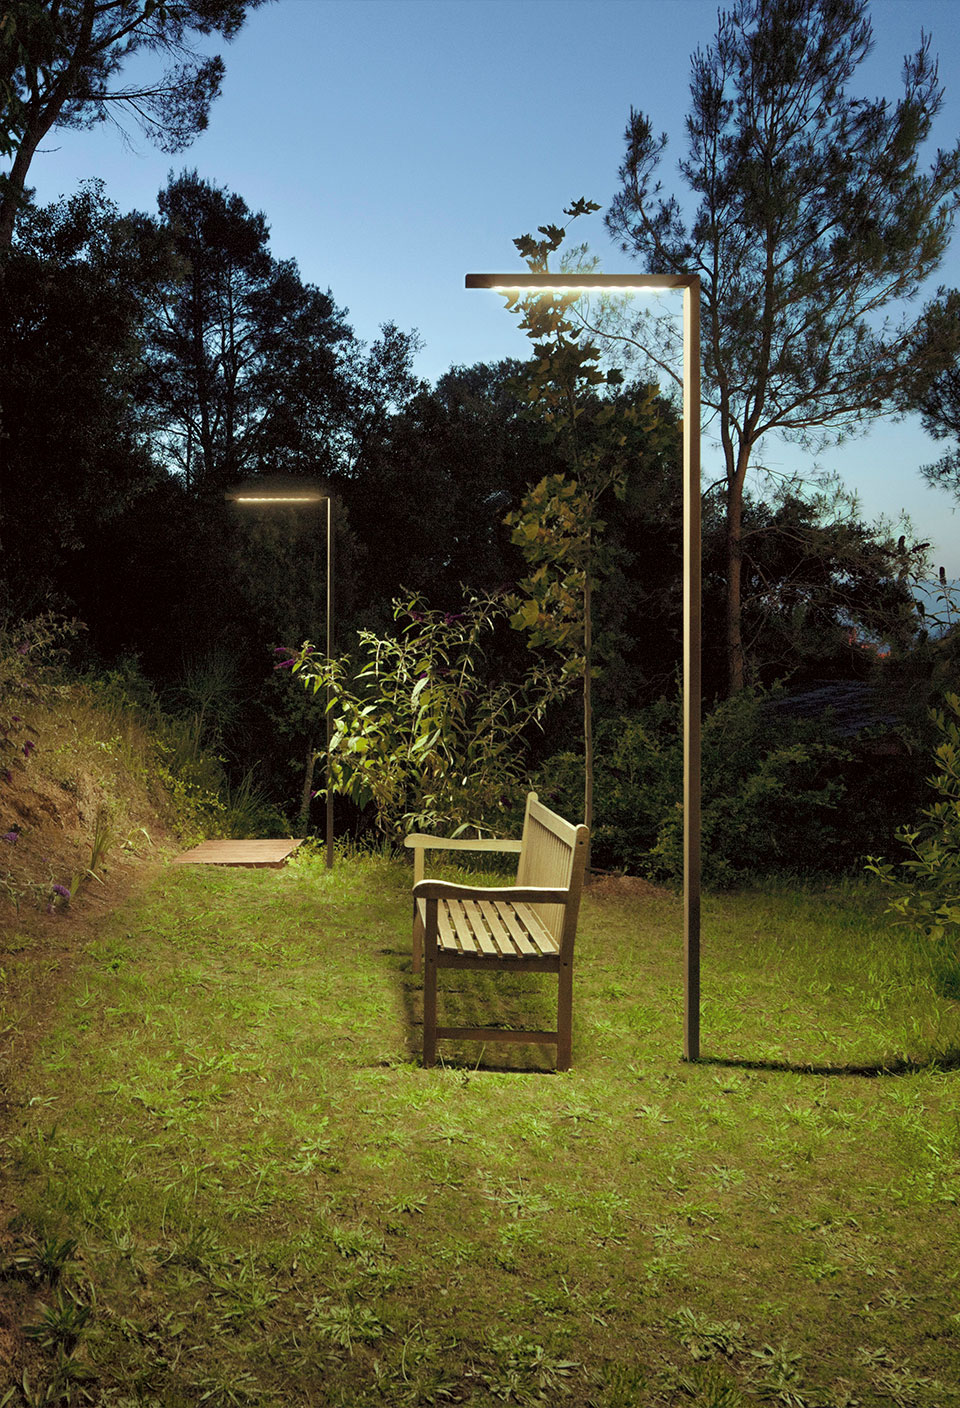 Vibia The Edit - Brightening up terraces with Vibia - Palo Alto